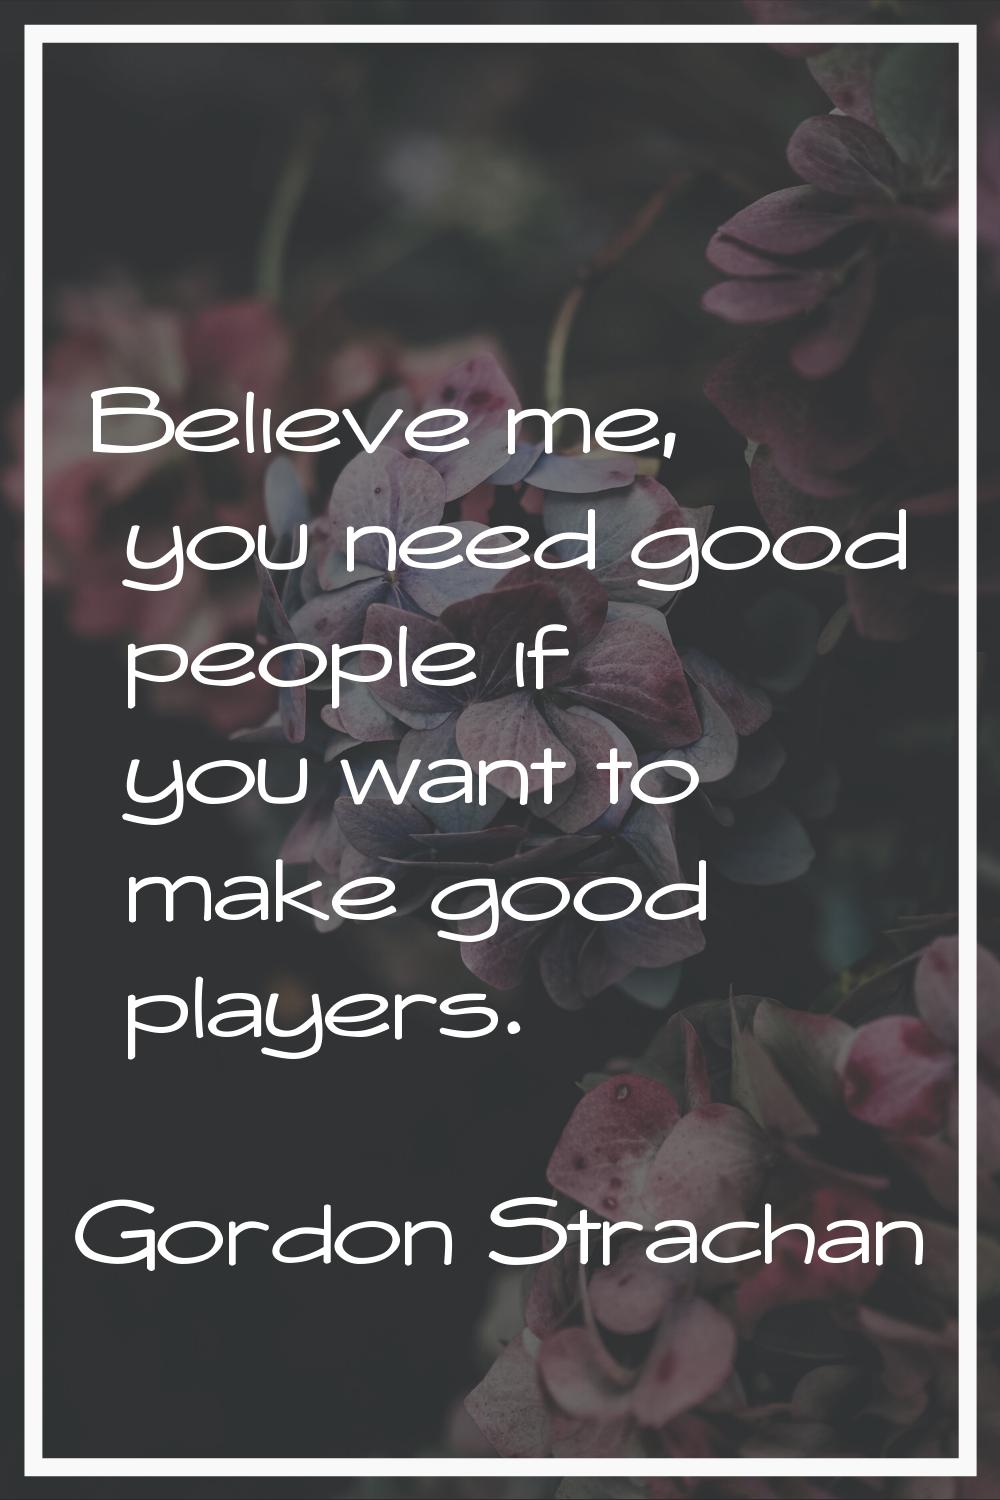 Believe me, you need good people if you want to make good players.